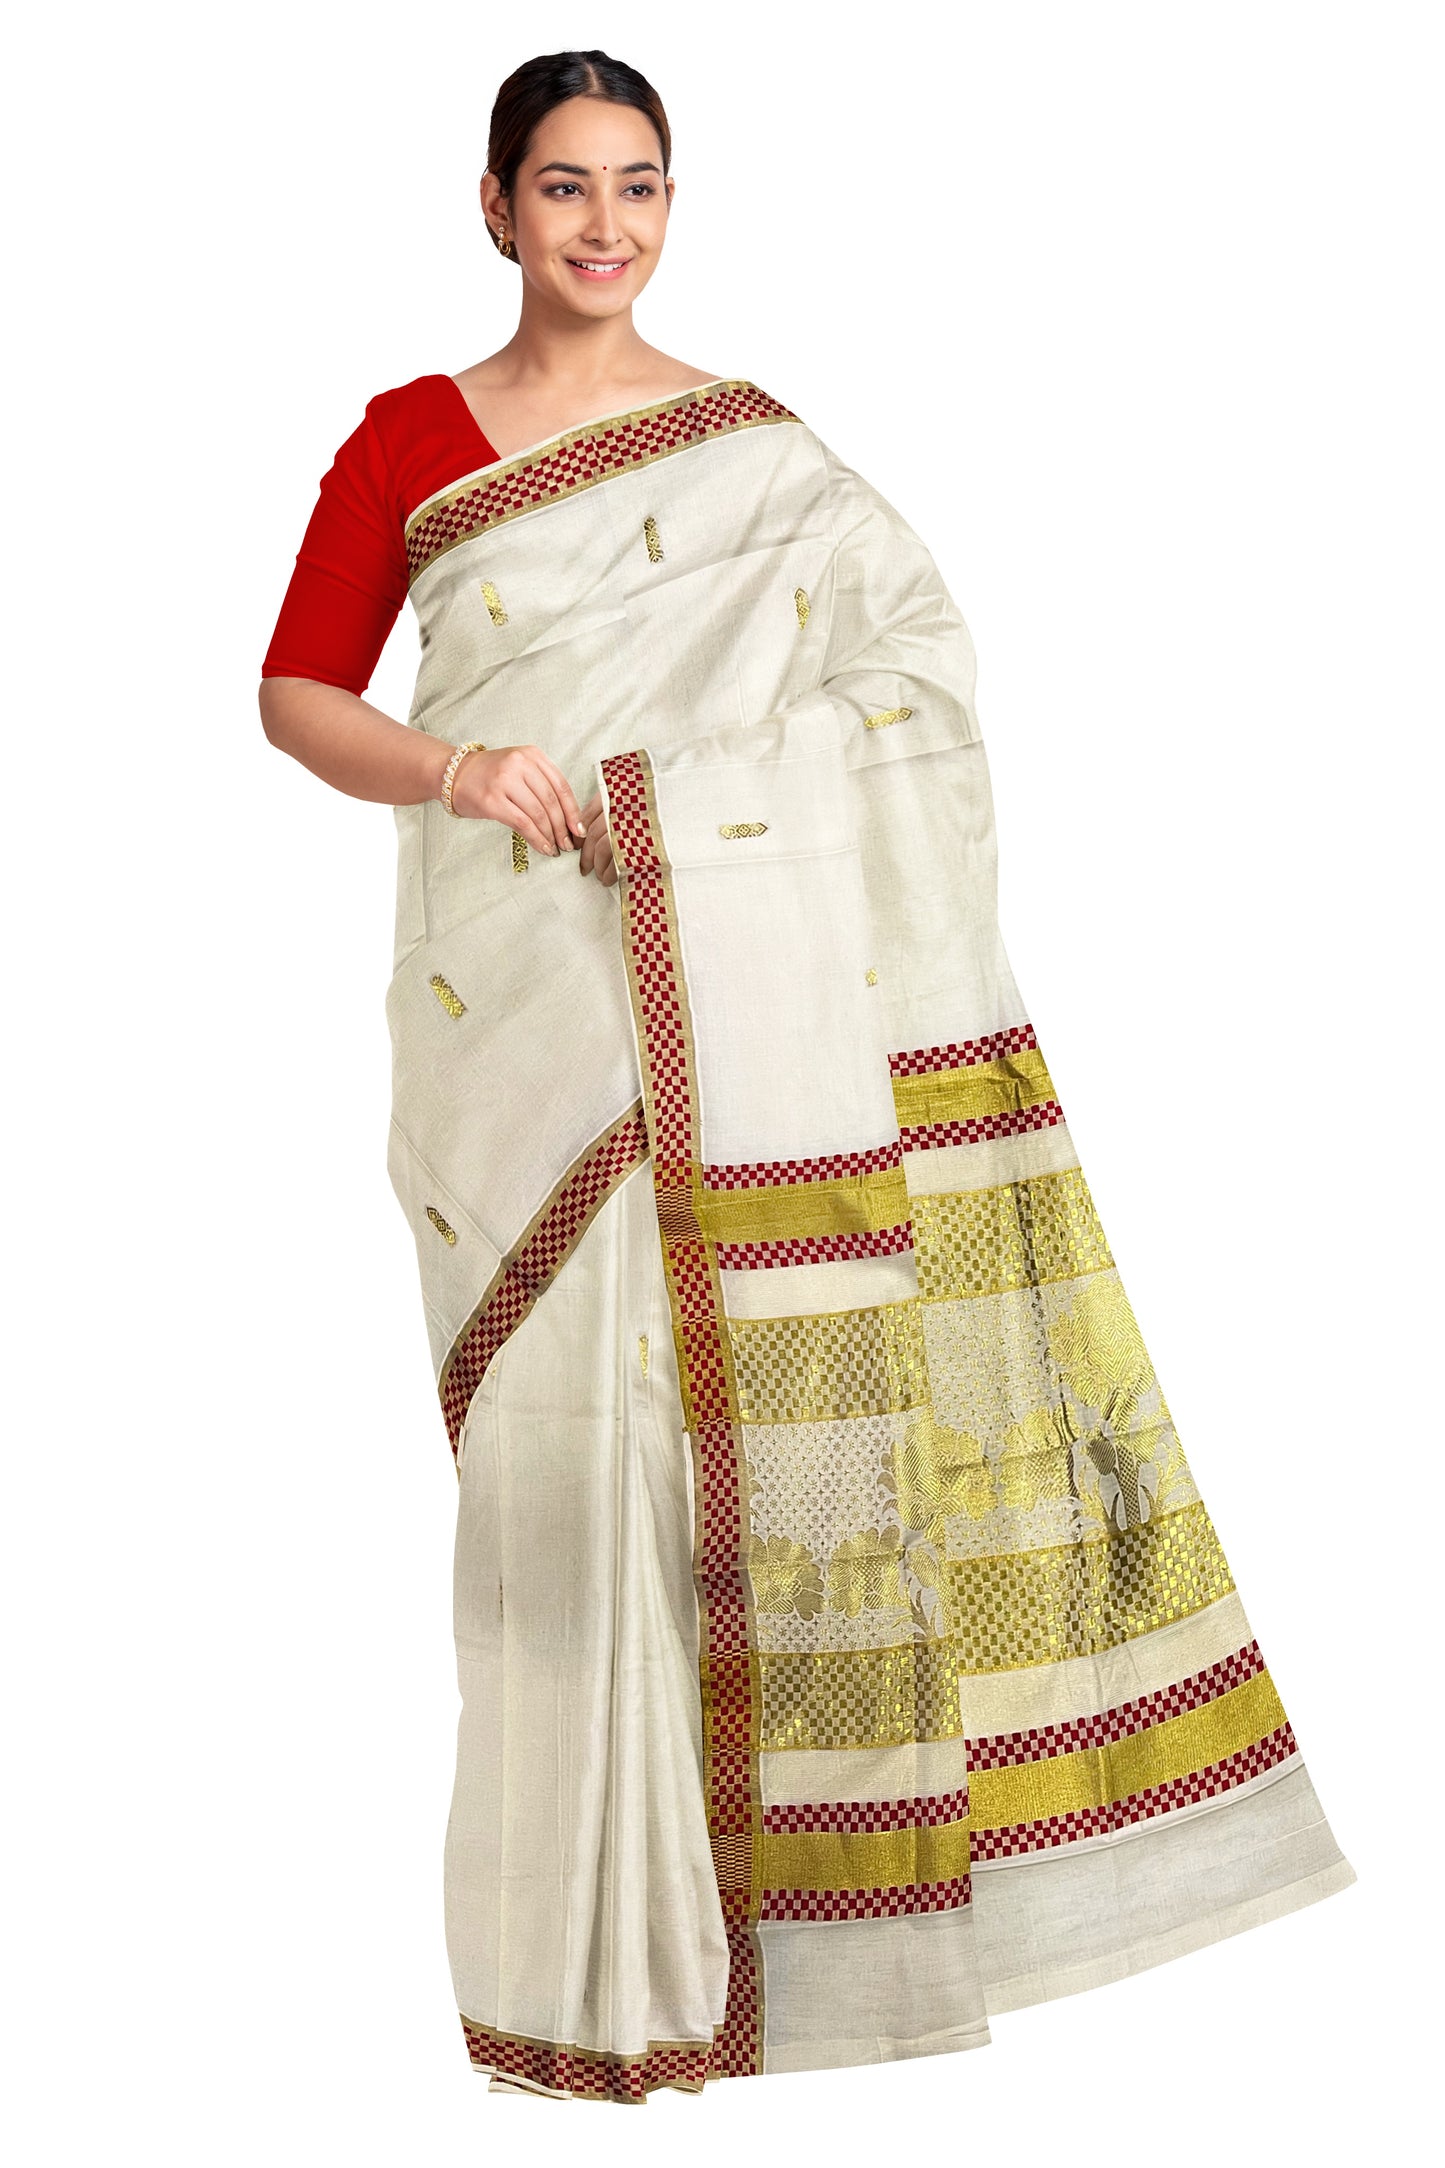 Pure Cotton Kerala Saree with Kasavu Woven Floral Patterns on Body and Red Golden Border